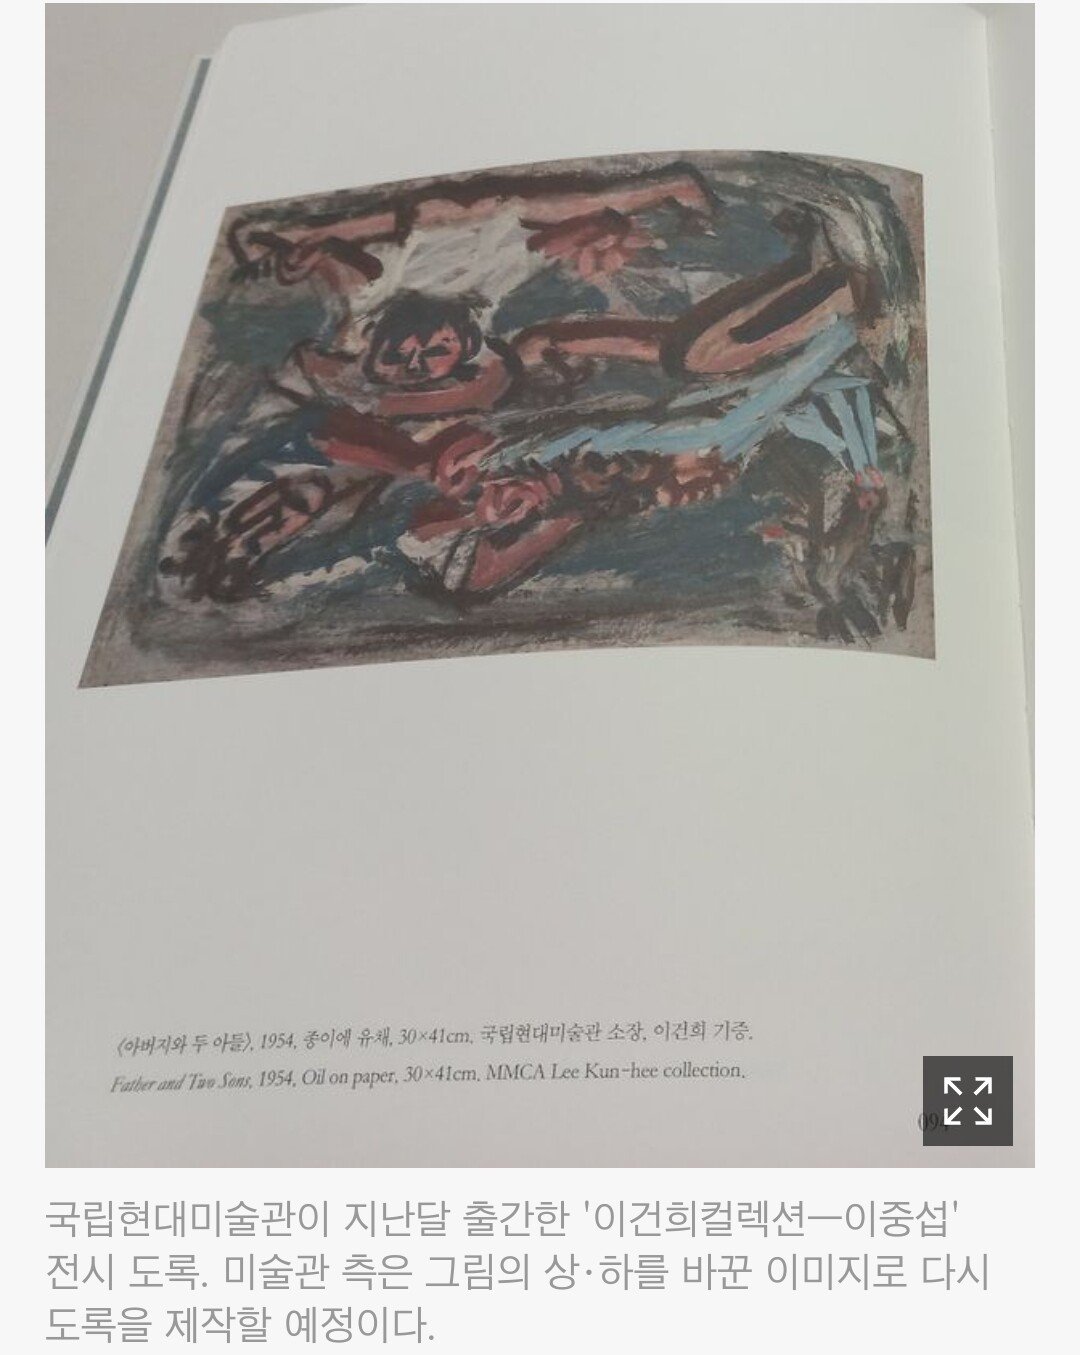 Lee Kun-hee Collection Lee Joong-seop's drawing was hung upside down for over a monthnews